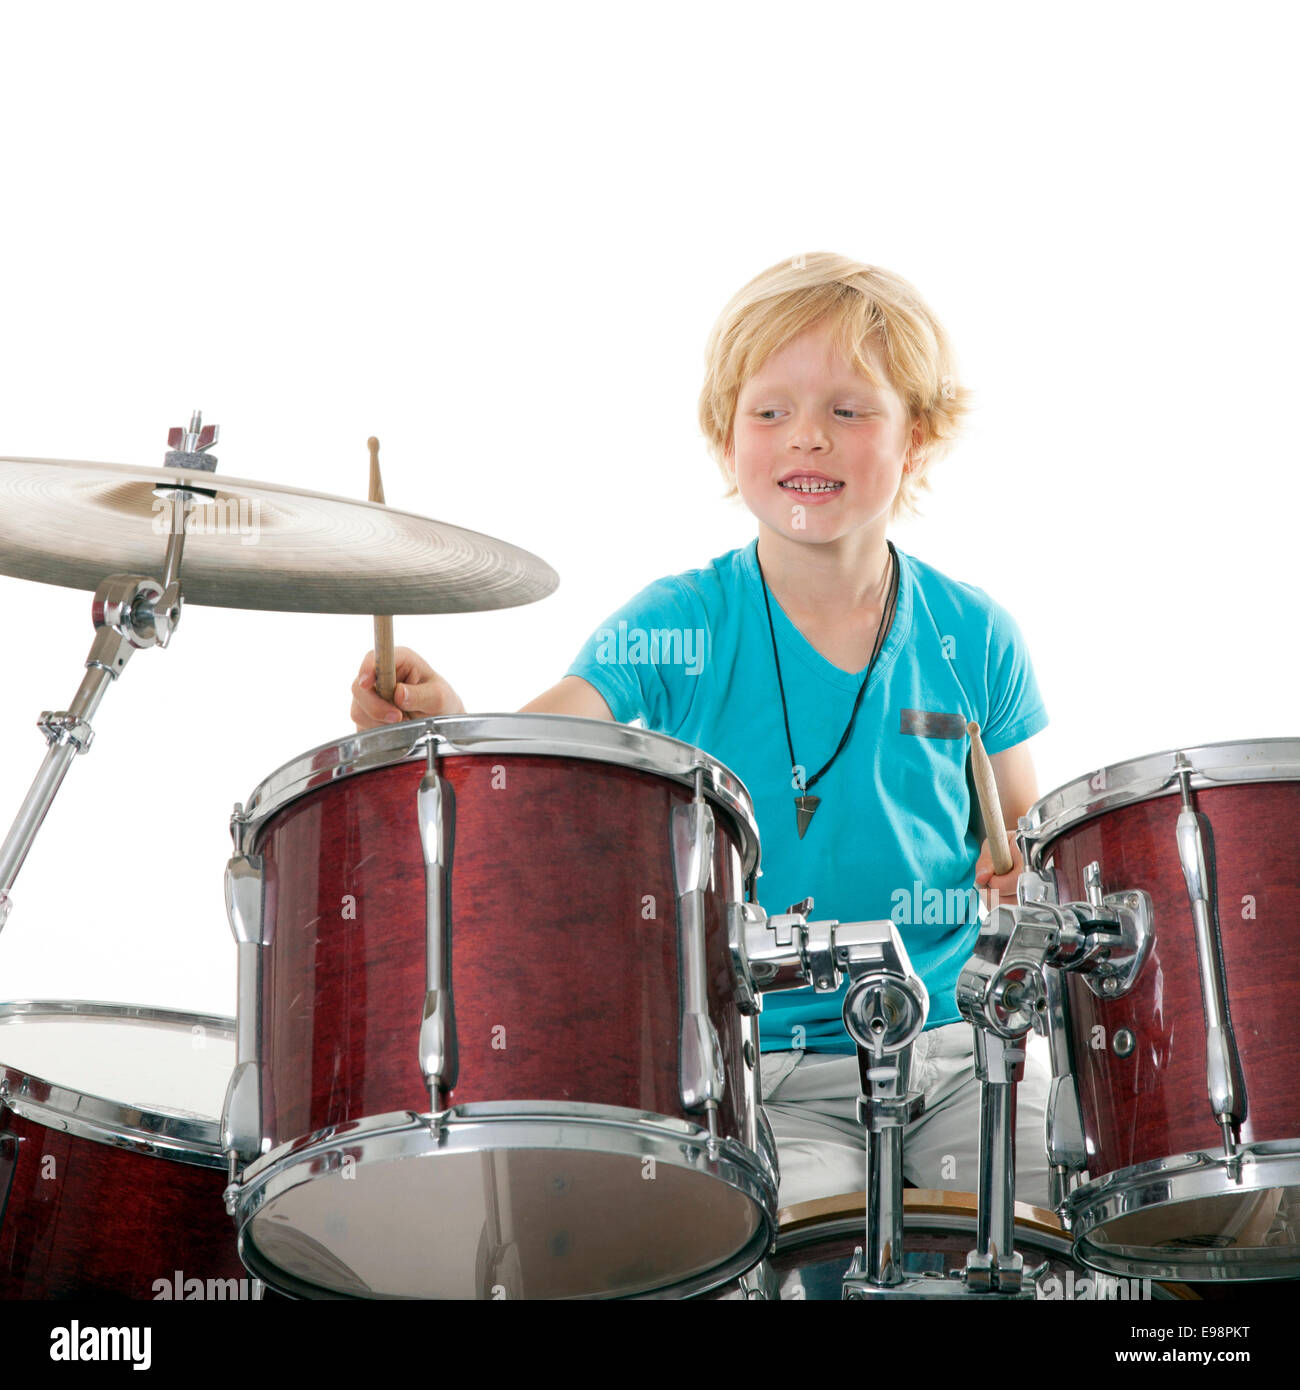 young boy playing drums against white background Stock Photo